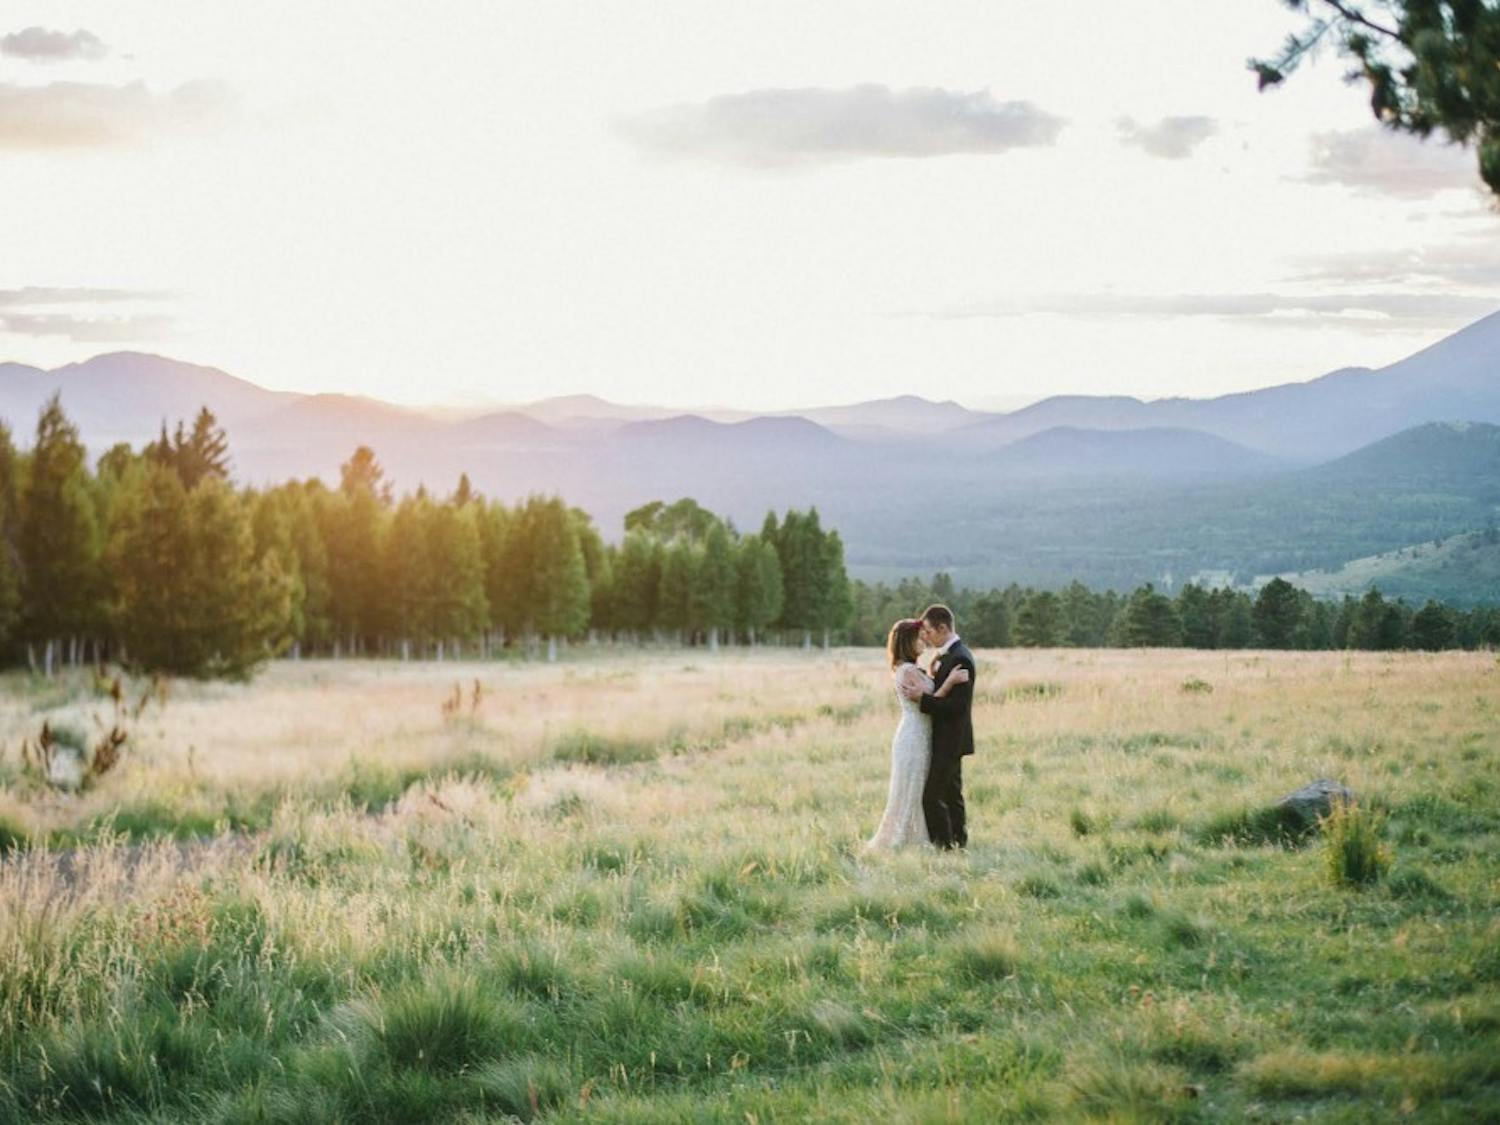 Jaclyn Raymond demonstrates her talent with this wedding photo.&nbsp;